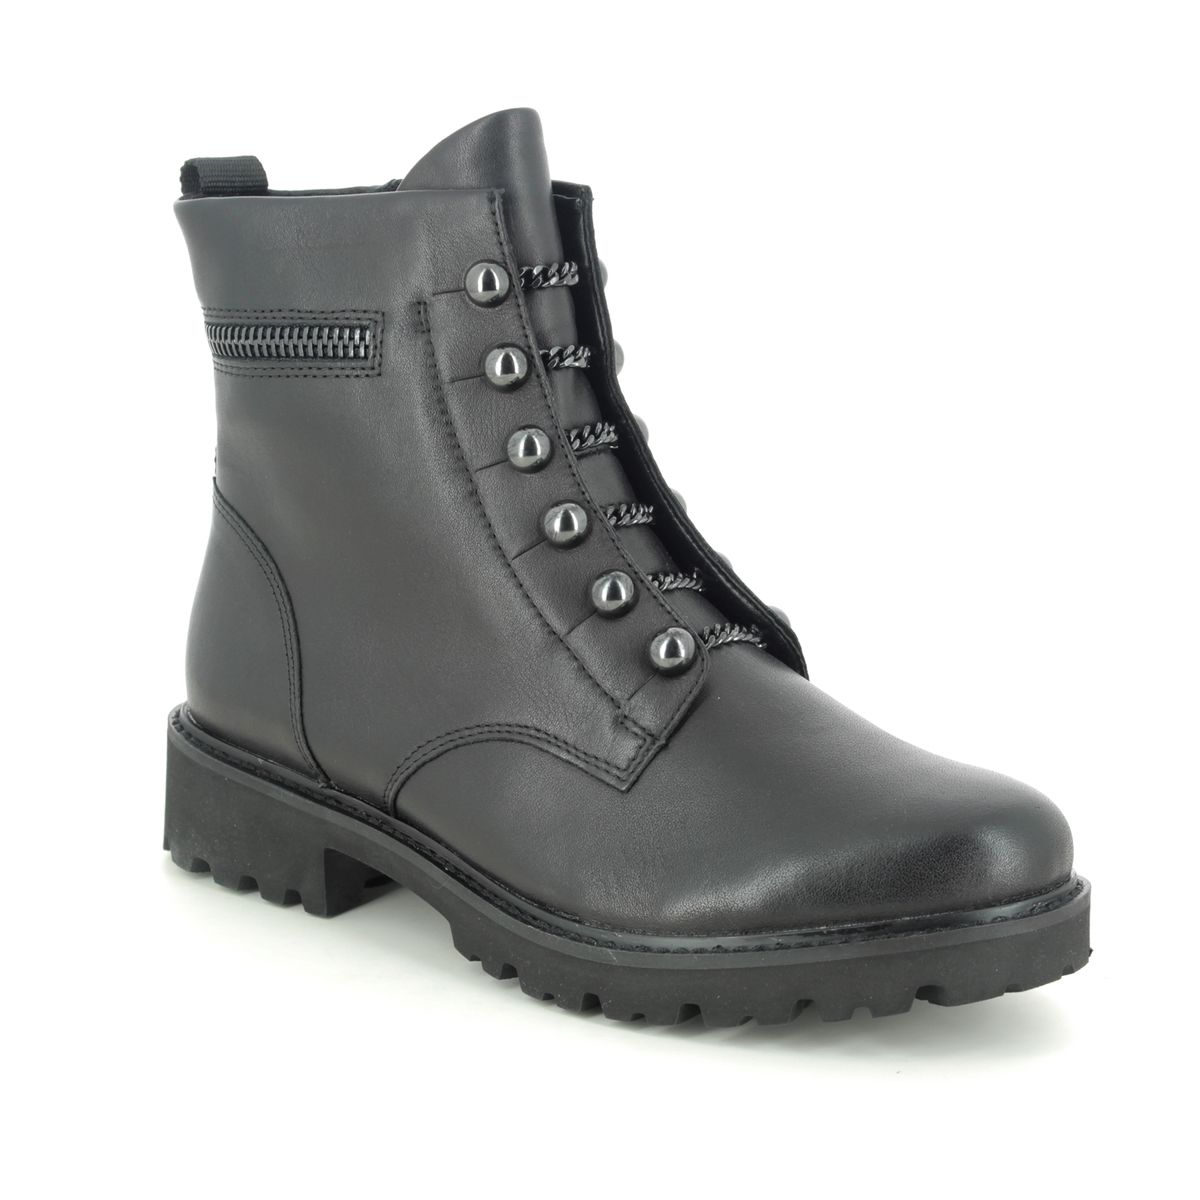 Remonte Docland Black Leather Womens Biker Boots D8670-01 In Size 36 In Plain Black Leather